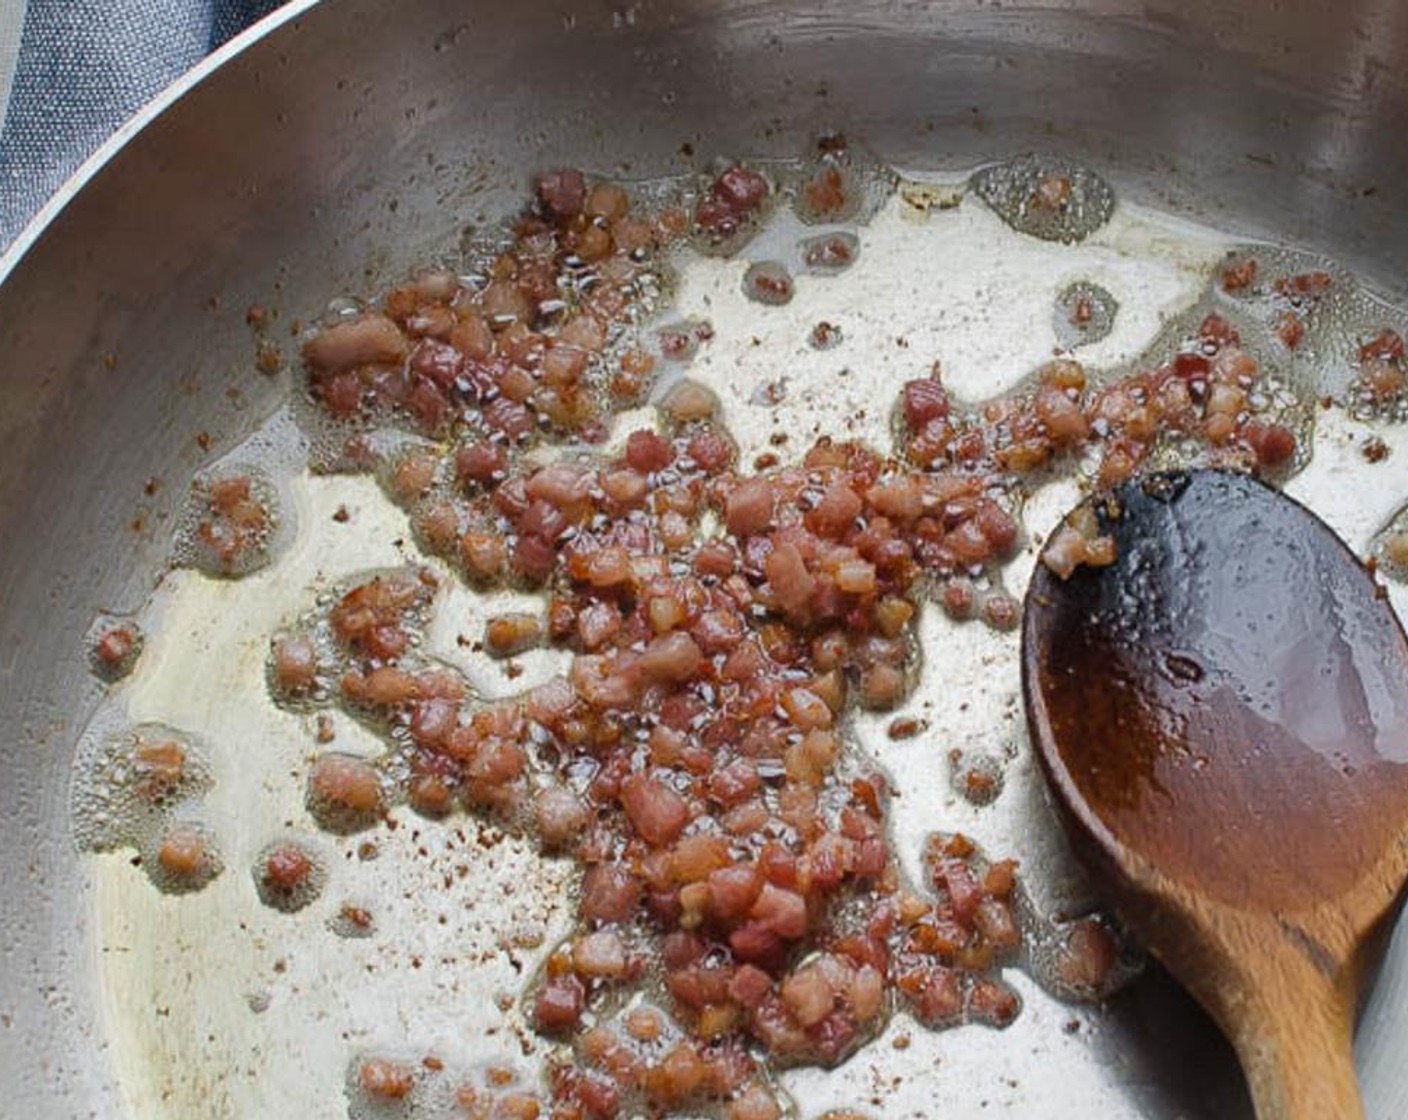 step 2 In a large skillet, heat the Olive Oil (1 Tbsp) over medium high heat. Add the Pancetta (1/4 cup) and cook until it has rendered some fat and started to crisp. Use a slotted spoon to transfer the pancetta to a small bowl.